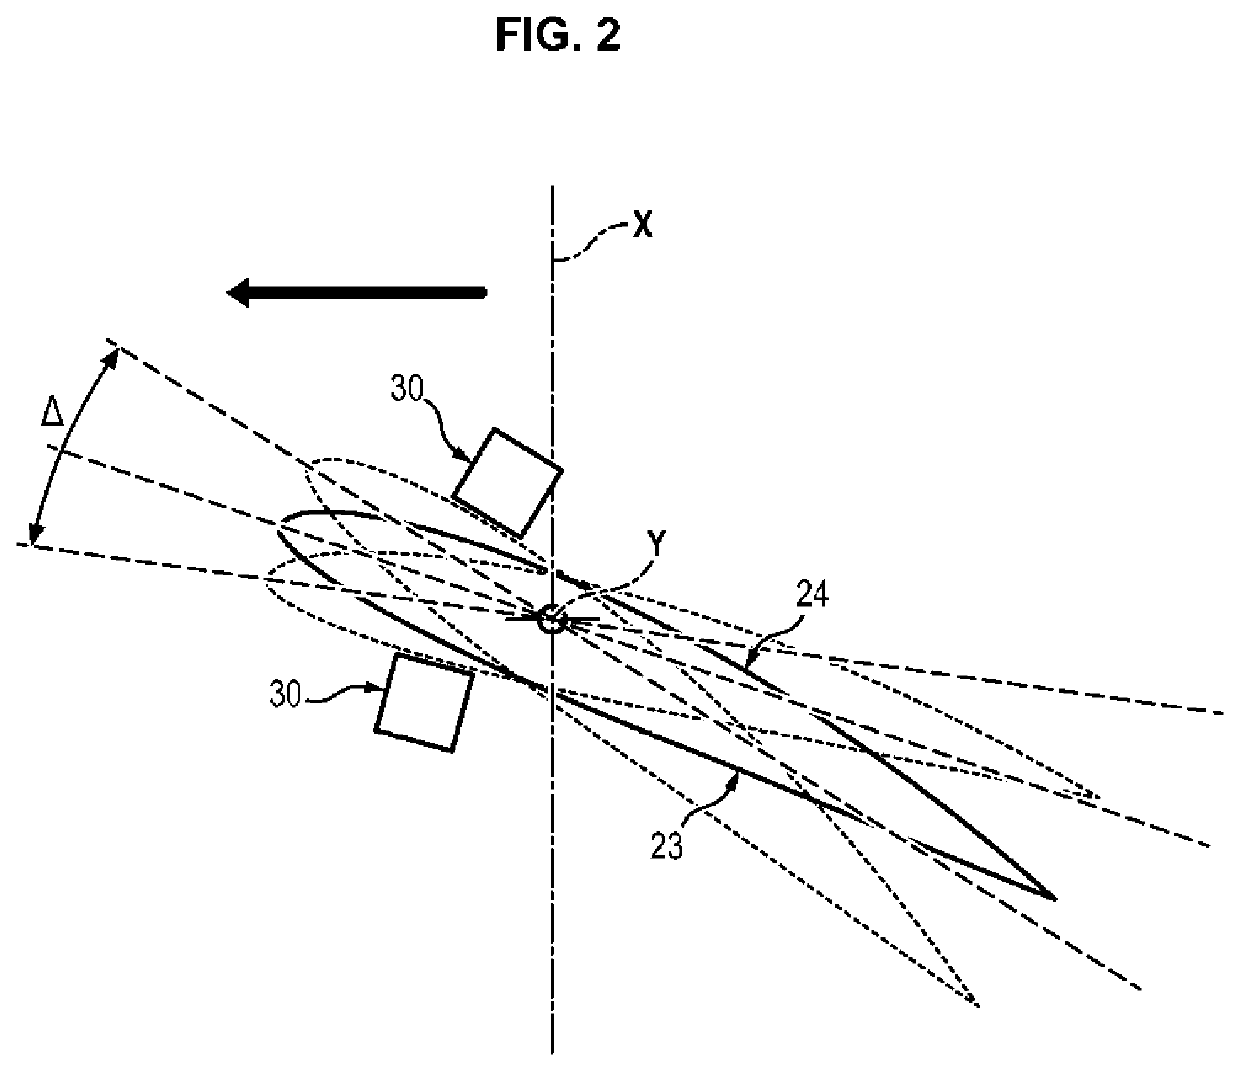 Low-pitch variable-setting fan of a turbine engine